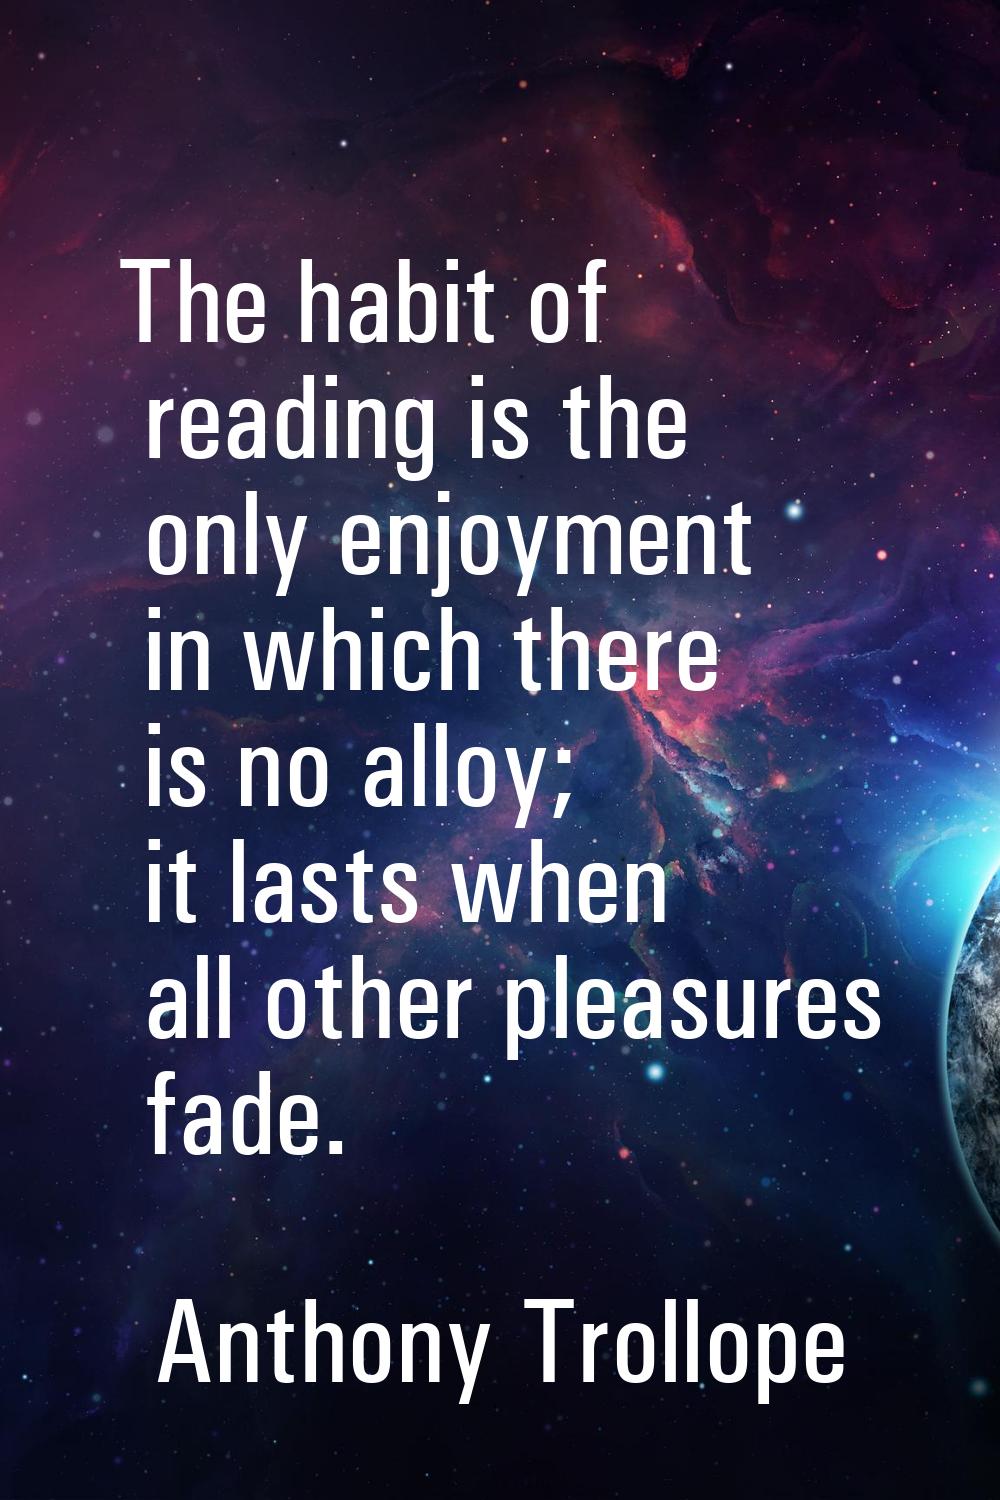 The habit of reading is the only enjoyment in which there is no alloy; it lasts when all other plea